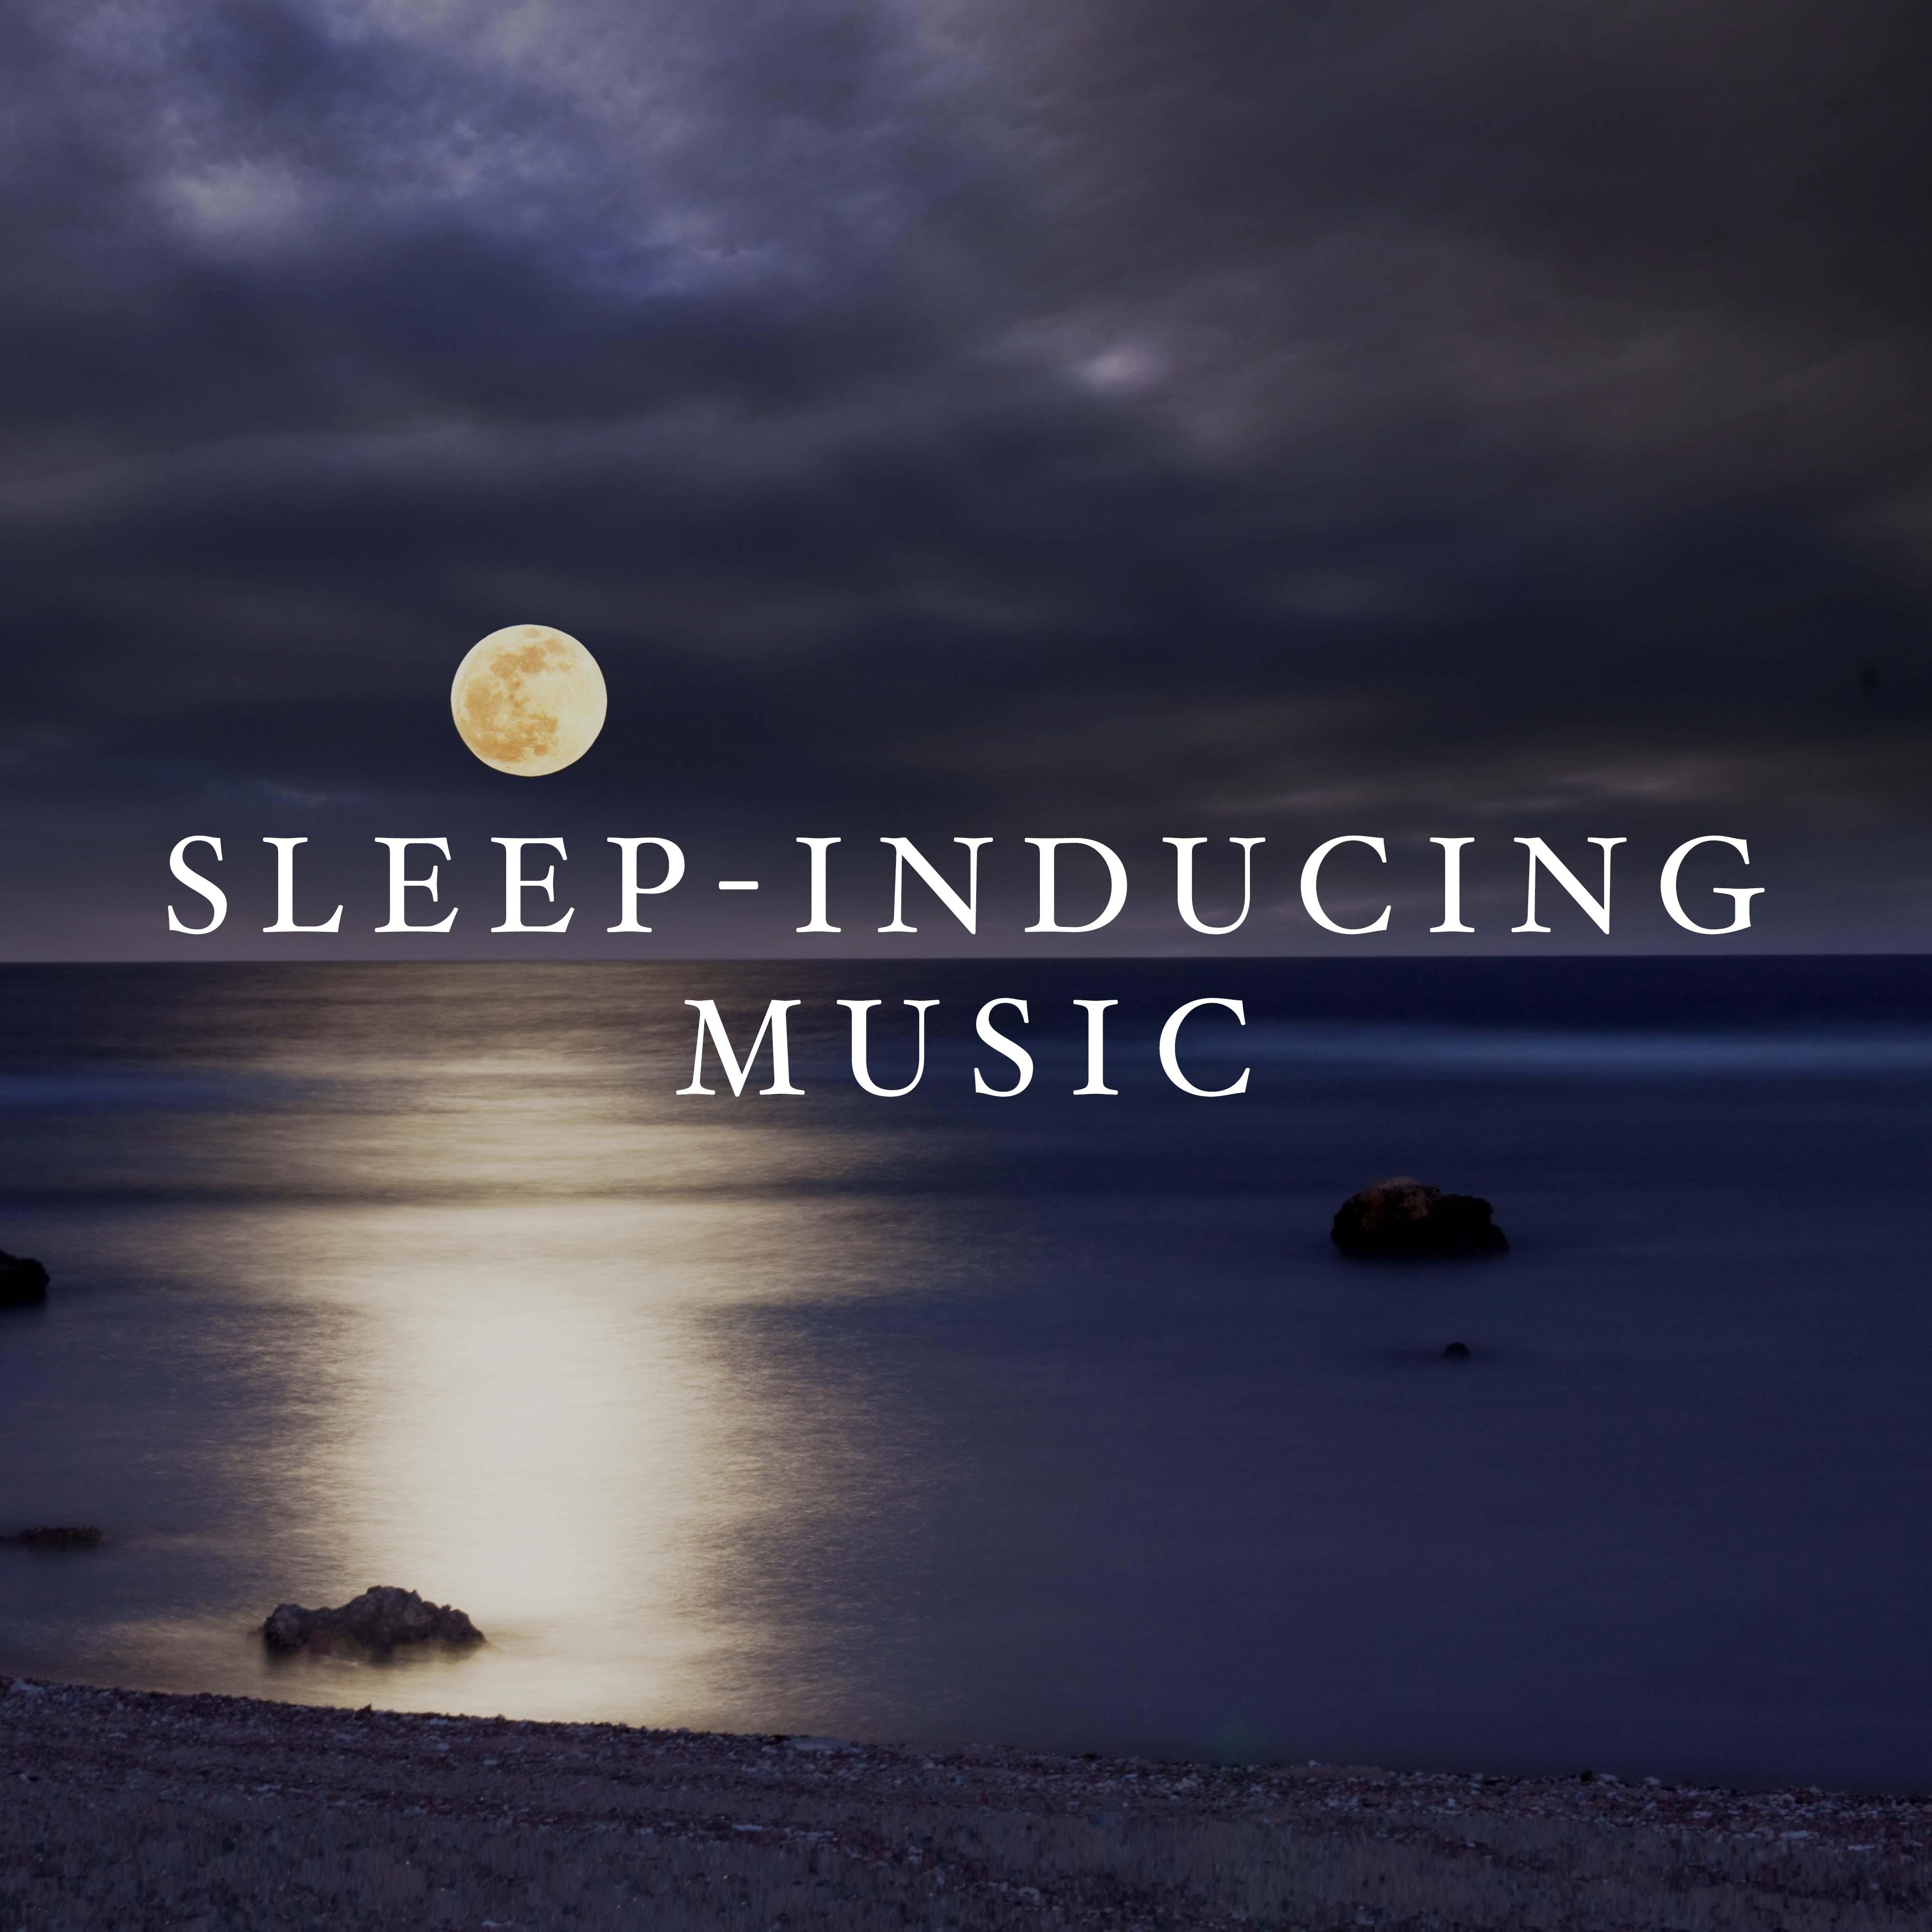 Sleep-Inducing Music: Stunning Natural Sounds that Relax and Calm us.